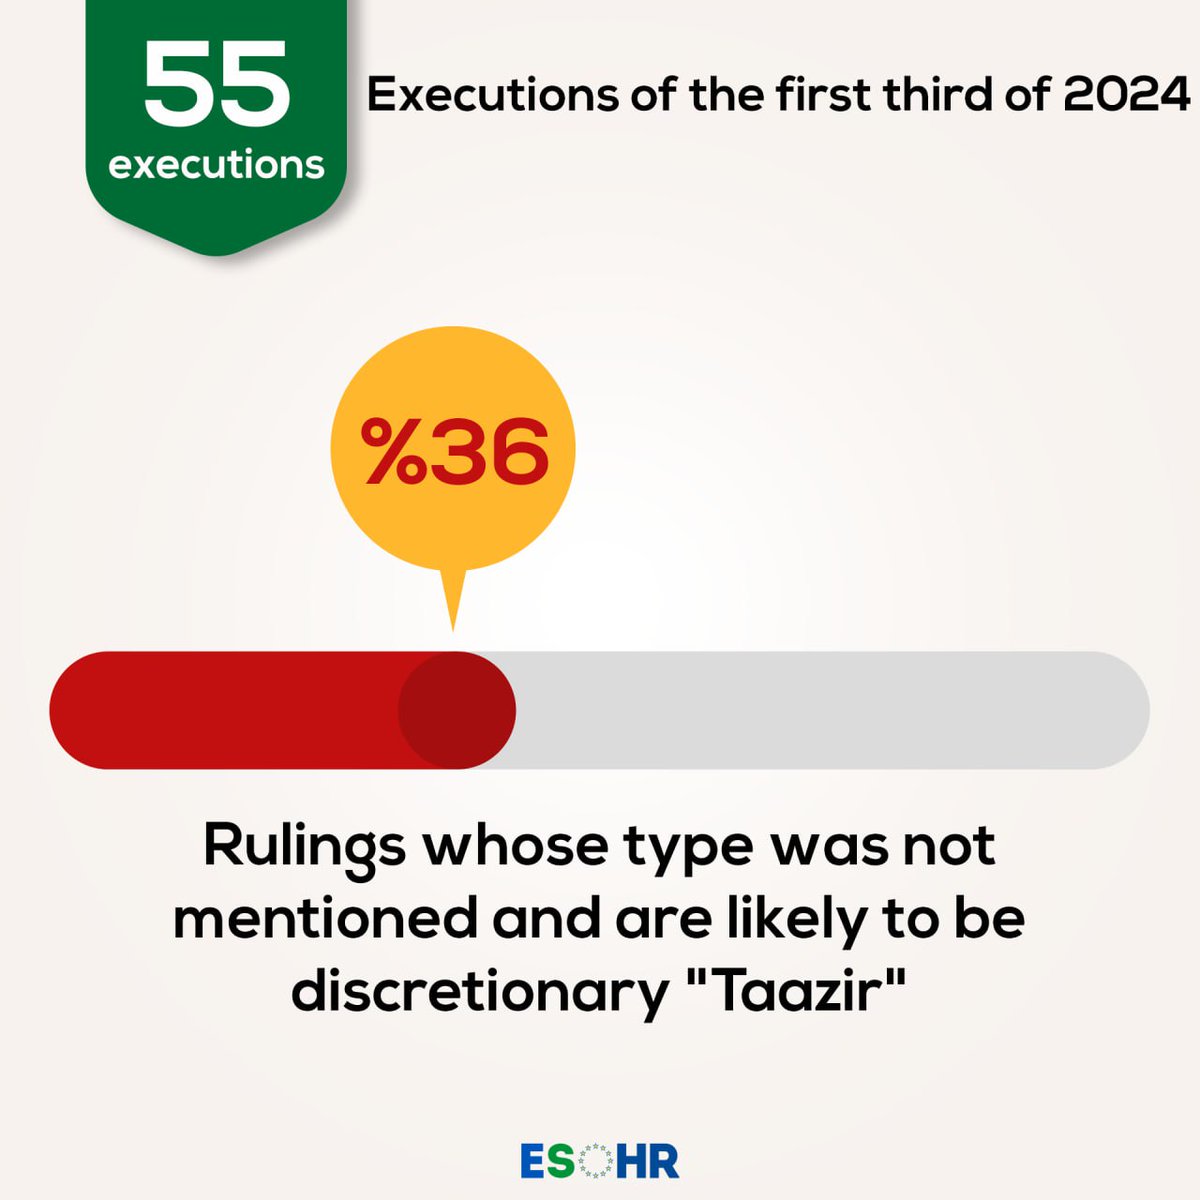 During 2024, statements of executions have rarely referred to taazir sentences (Mostly applied on less severe charges), while many were missing the type of sentence. 🔴 #SaudiArabia is deceiving, the organization believes these are taazir sentences. cutt.ly/leewRhdx